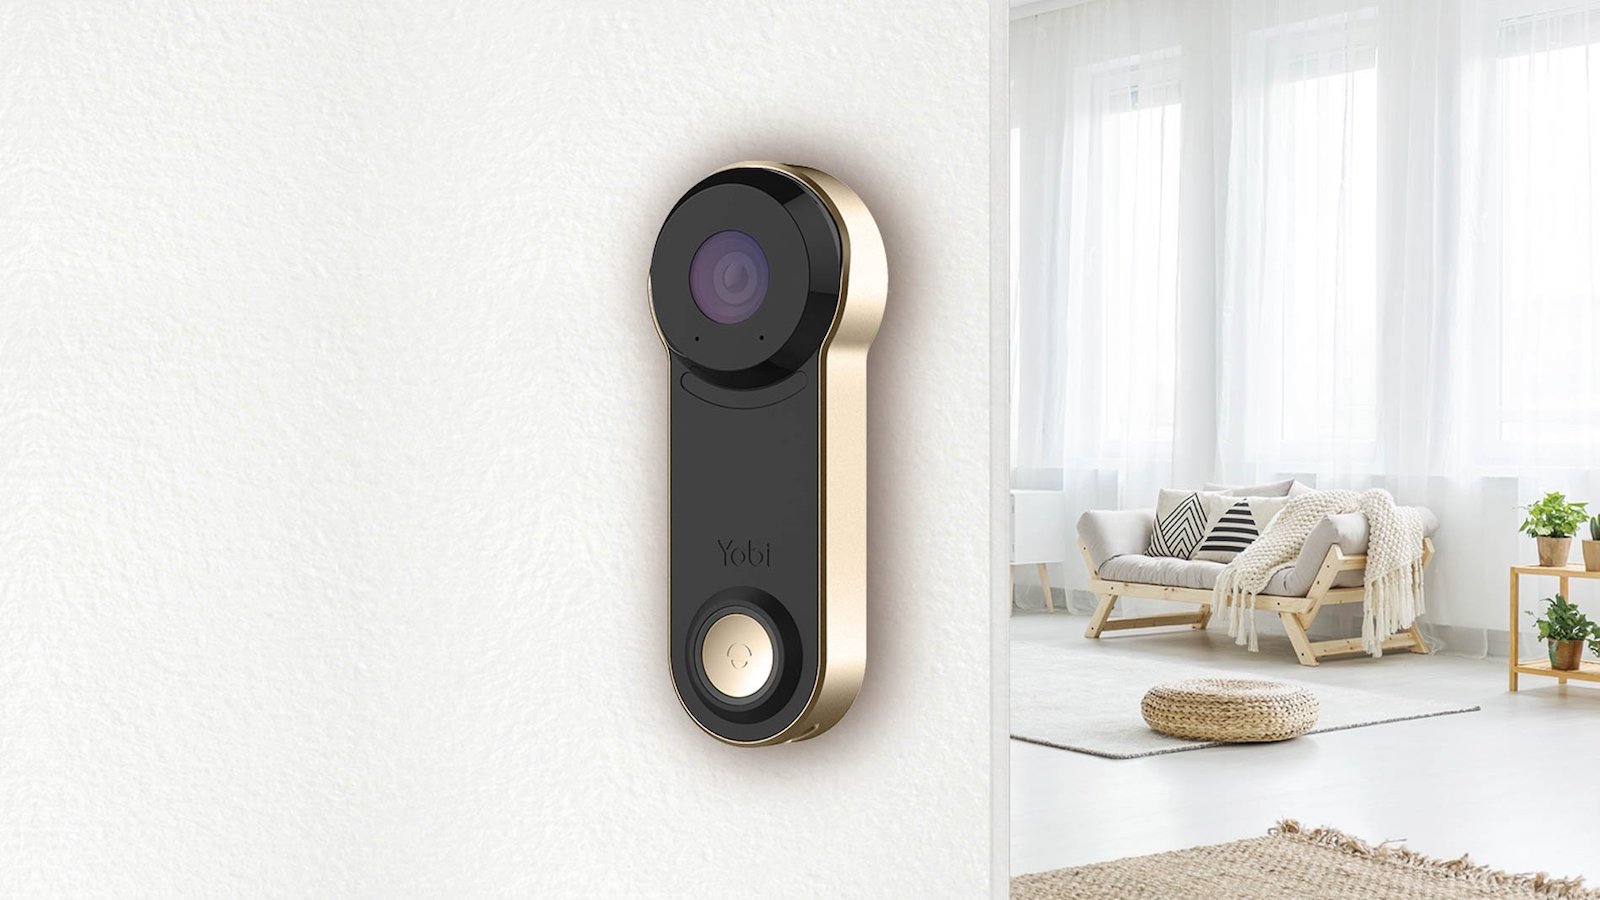 Yobi Video Smart Doorbell B3 features infrared night vision, smart notifications, and more